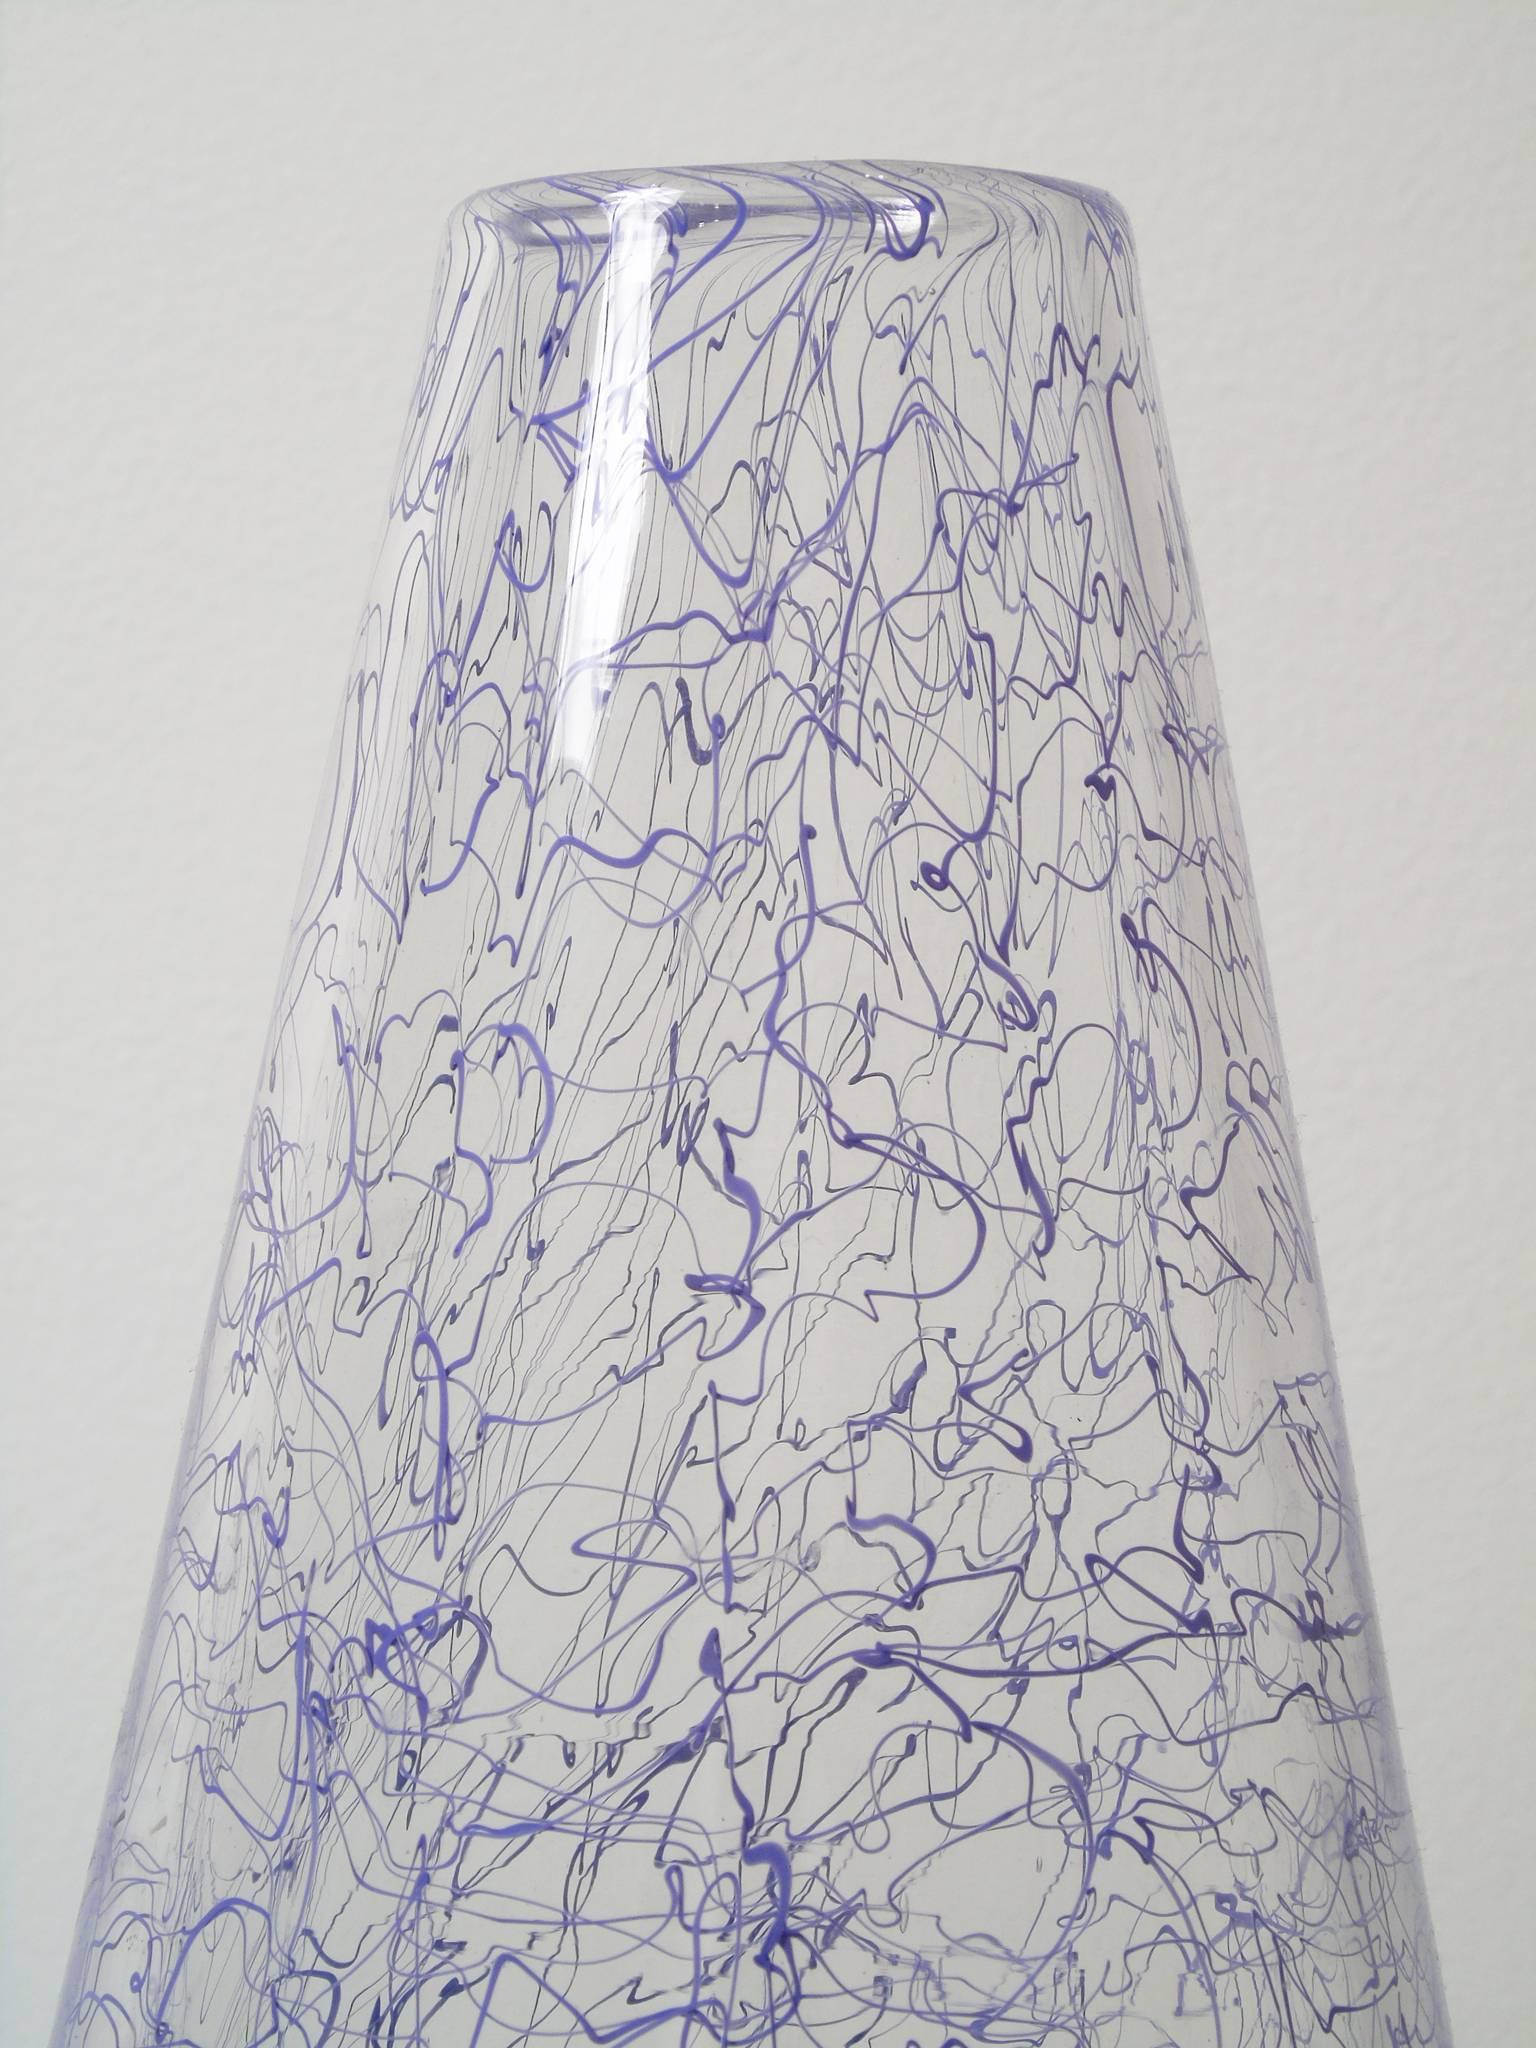 Purple #3 from Angus Powers' Squiggle Series is a blow glass vessel with kinetically generated lines throughout. The lavender colored squiggles are incorporated in clear glass. The piece is signed and dated 2018 on the bottom. 

Angus Powers teaches